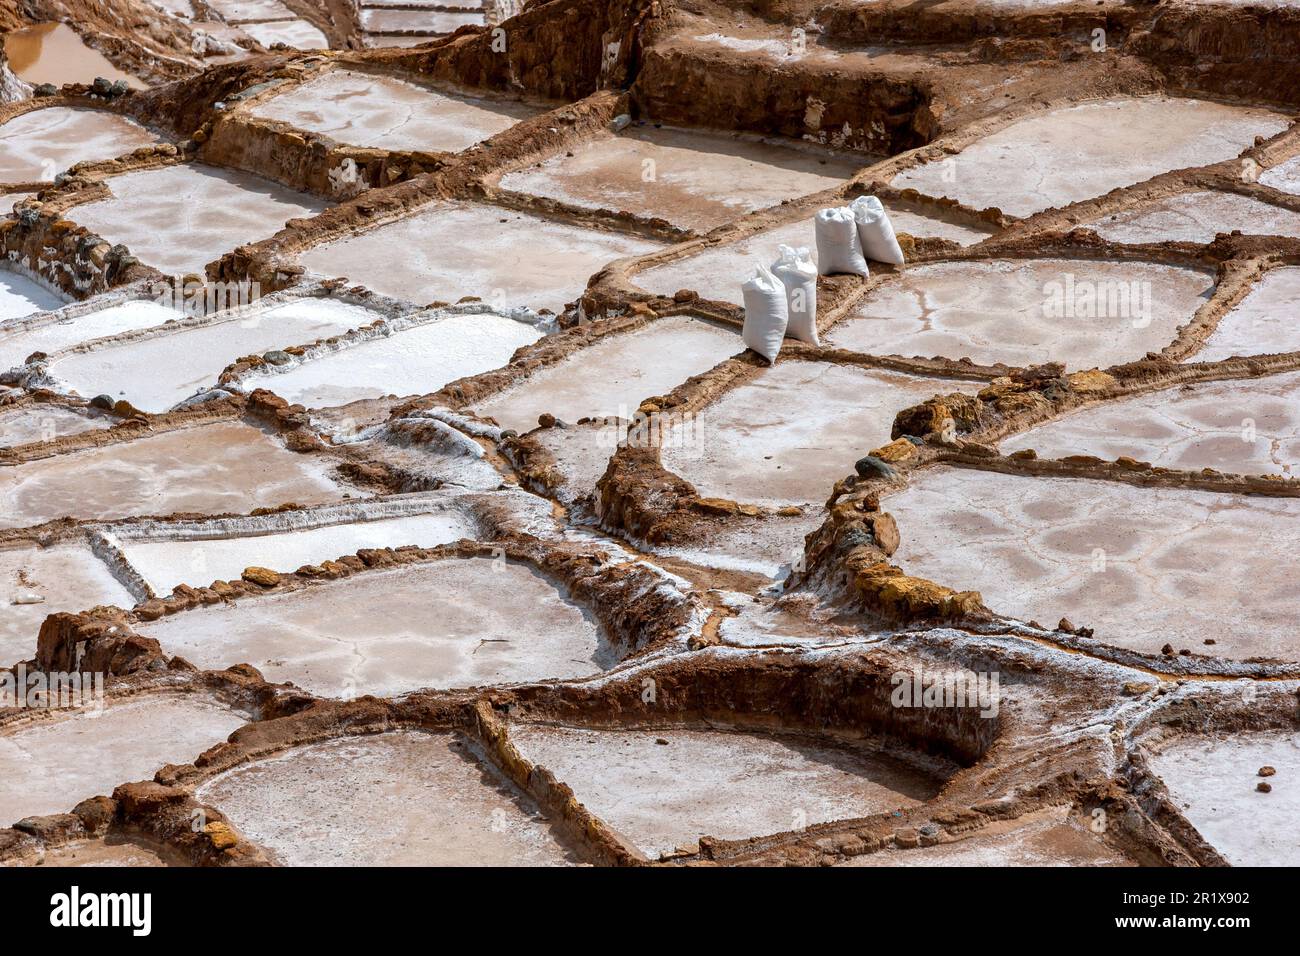 Bags of salt collected from an evaporated pond at the Maras Salt Ponds in Peru wait to be transported for sale. Stock Photo